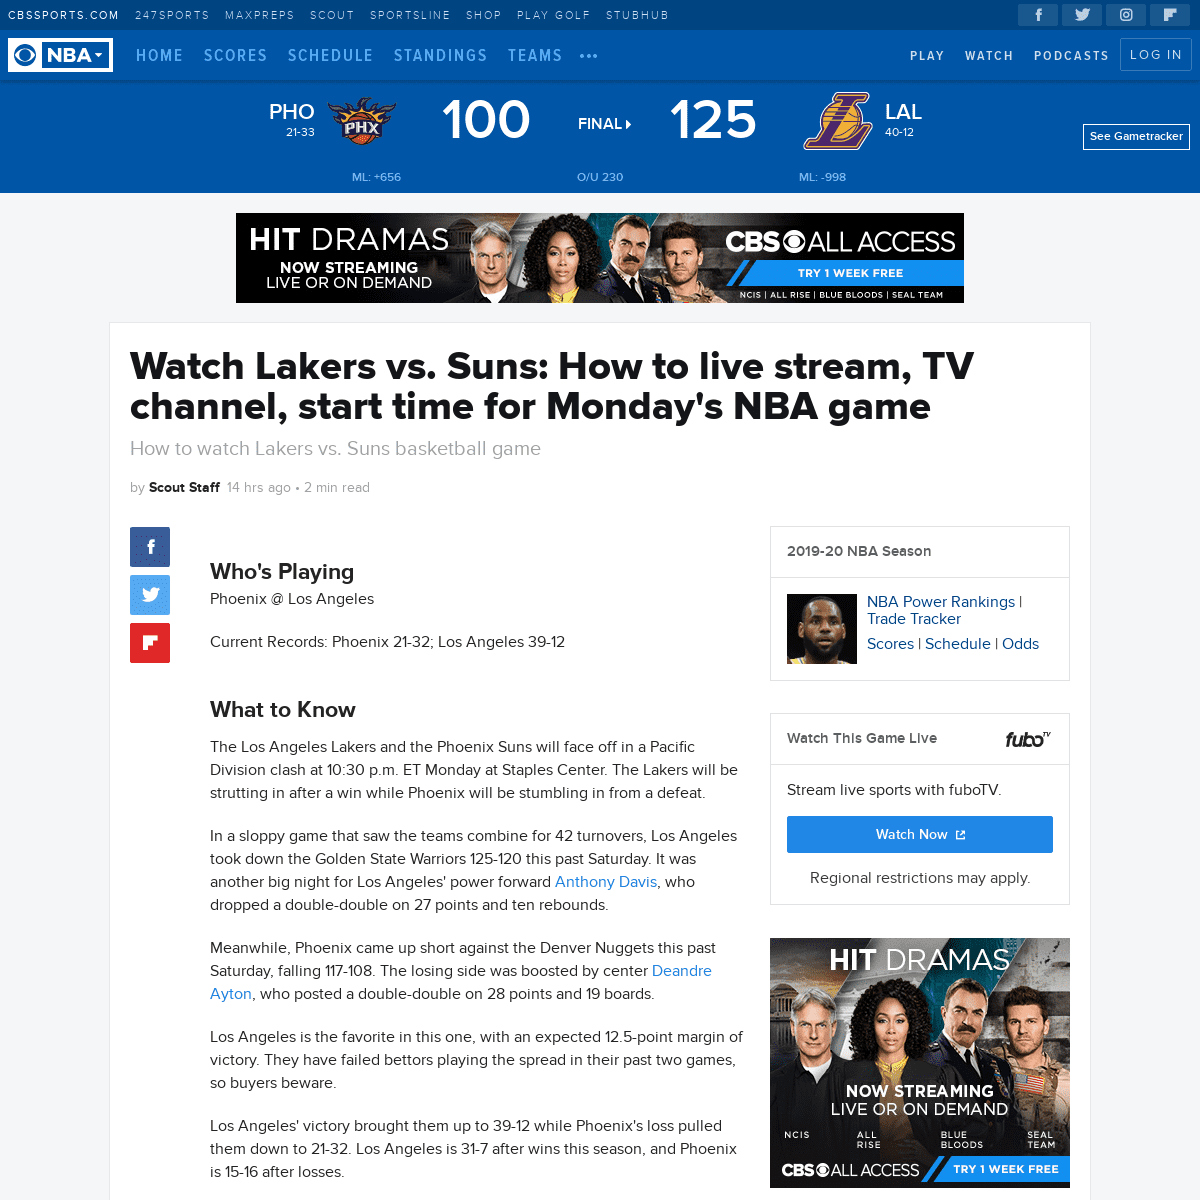 A complete backup of www.cbssports.com/nba/news/watch-lakers-vs-suns-how-to-live-stream-tv-channel-start-time-for-mondays-nba-ga